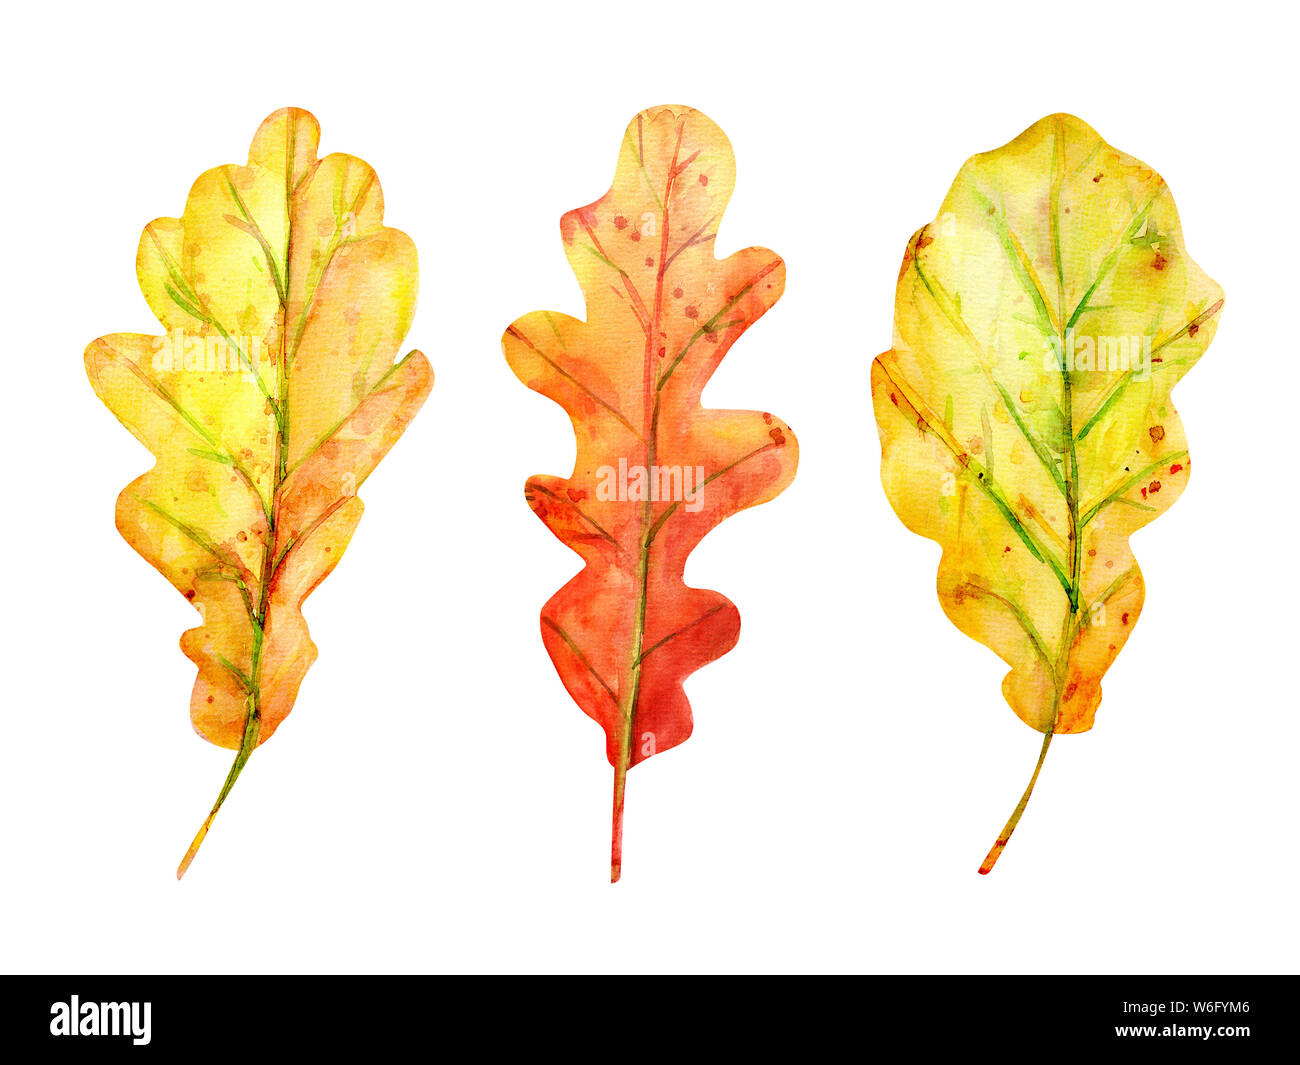 Watercolor autumn set with oak leaves. 3 fallen leaves of yellow and orange with drops and splashes. Isolated objects on white background. Elements fo Stock Photo